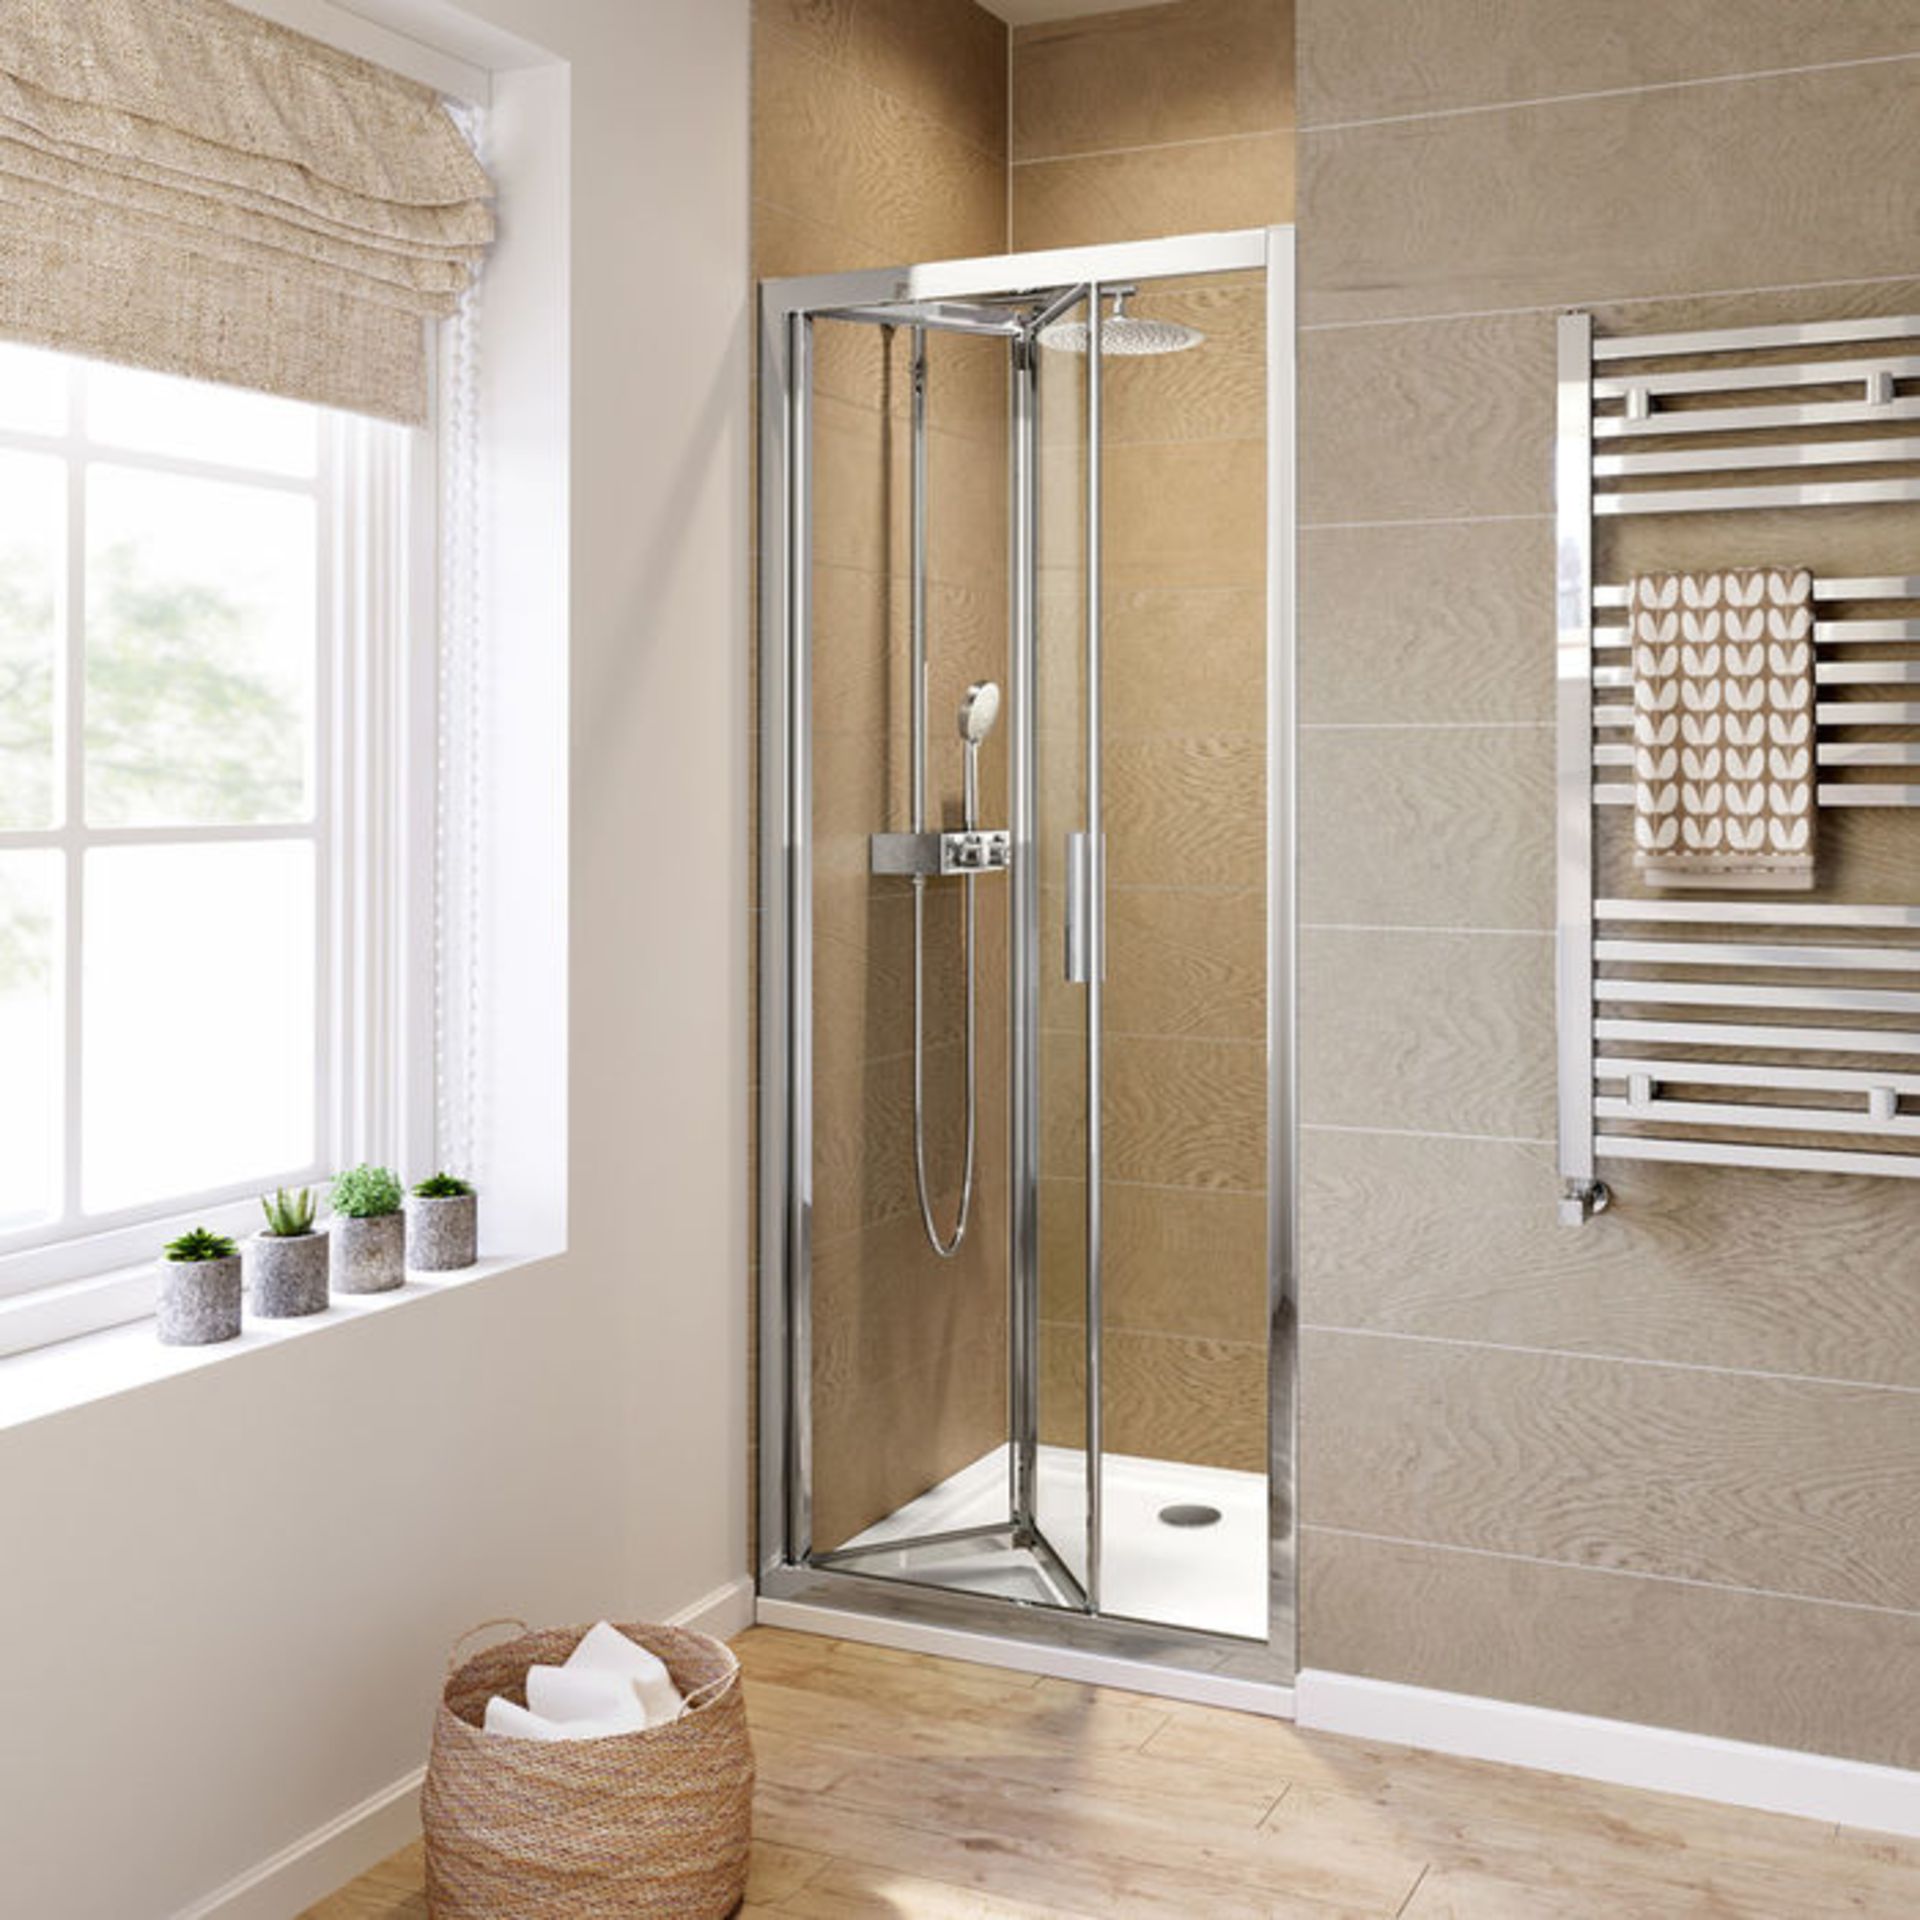 (AD282) 800mm - 6mm - Elements EasyClean Bifold Shower Door. RRP £299.99. 6mm Safety Glass - - Image 3 of 3